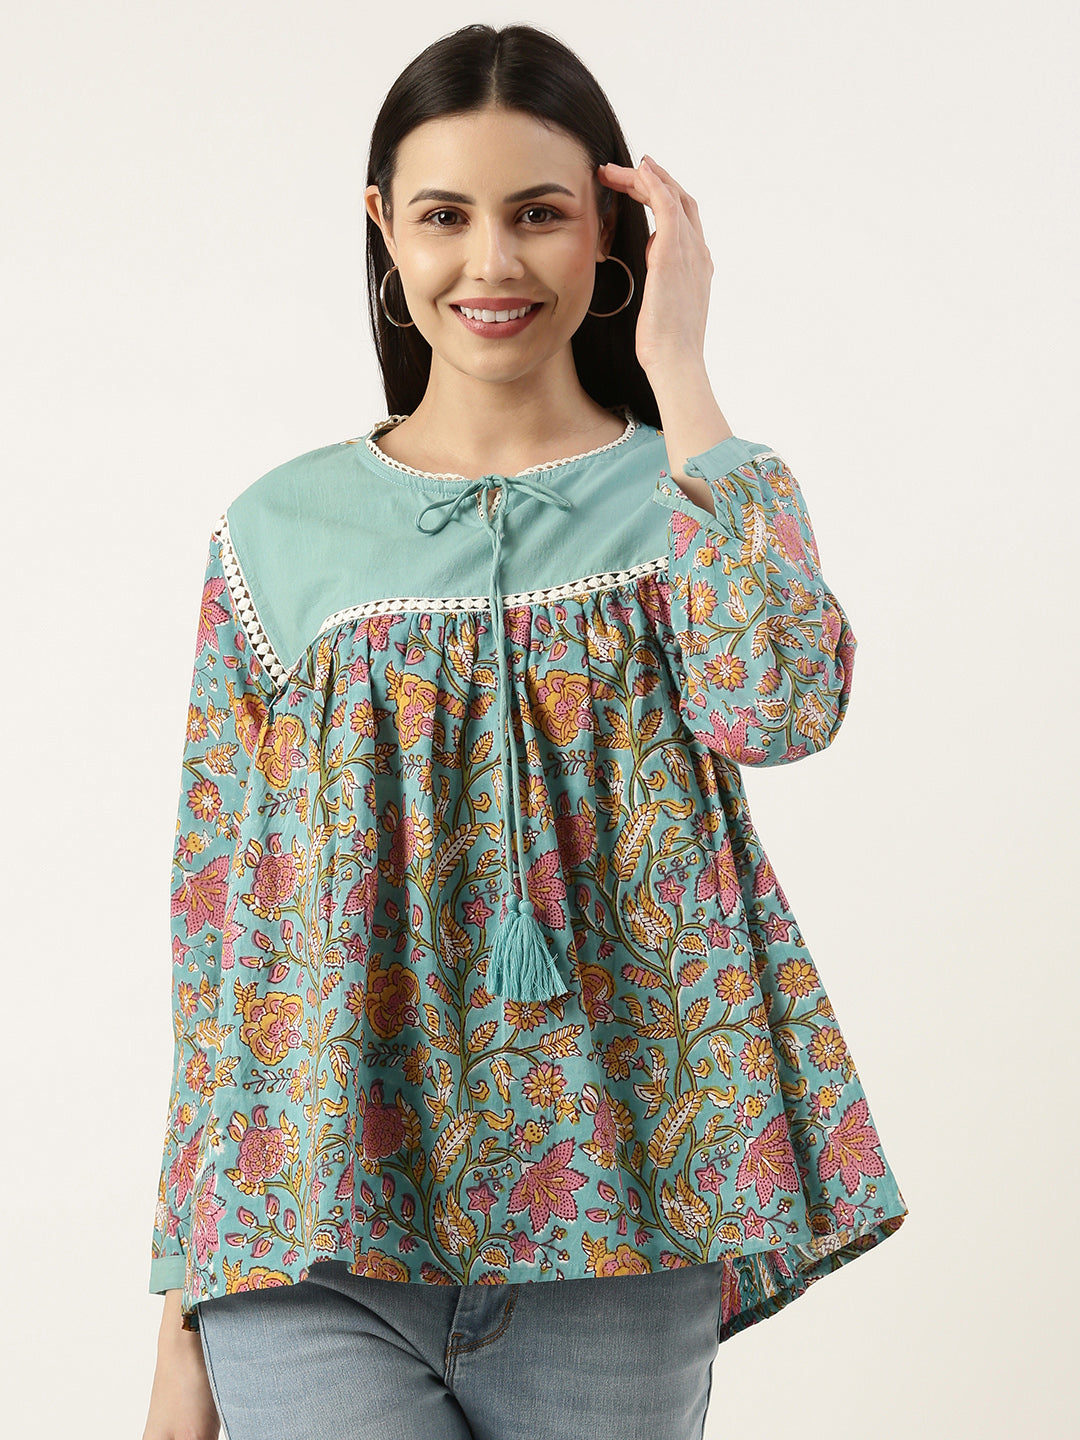 Teal Floral Printed Tie-Up Neck Tunic